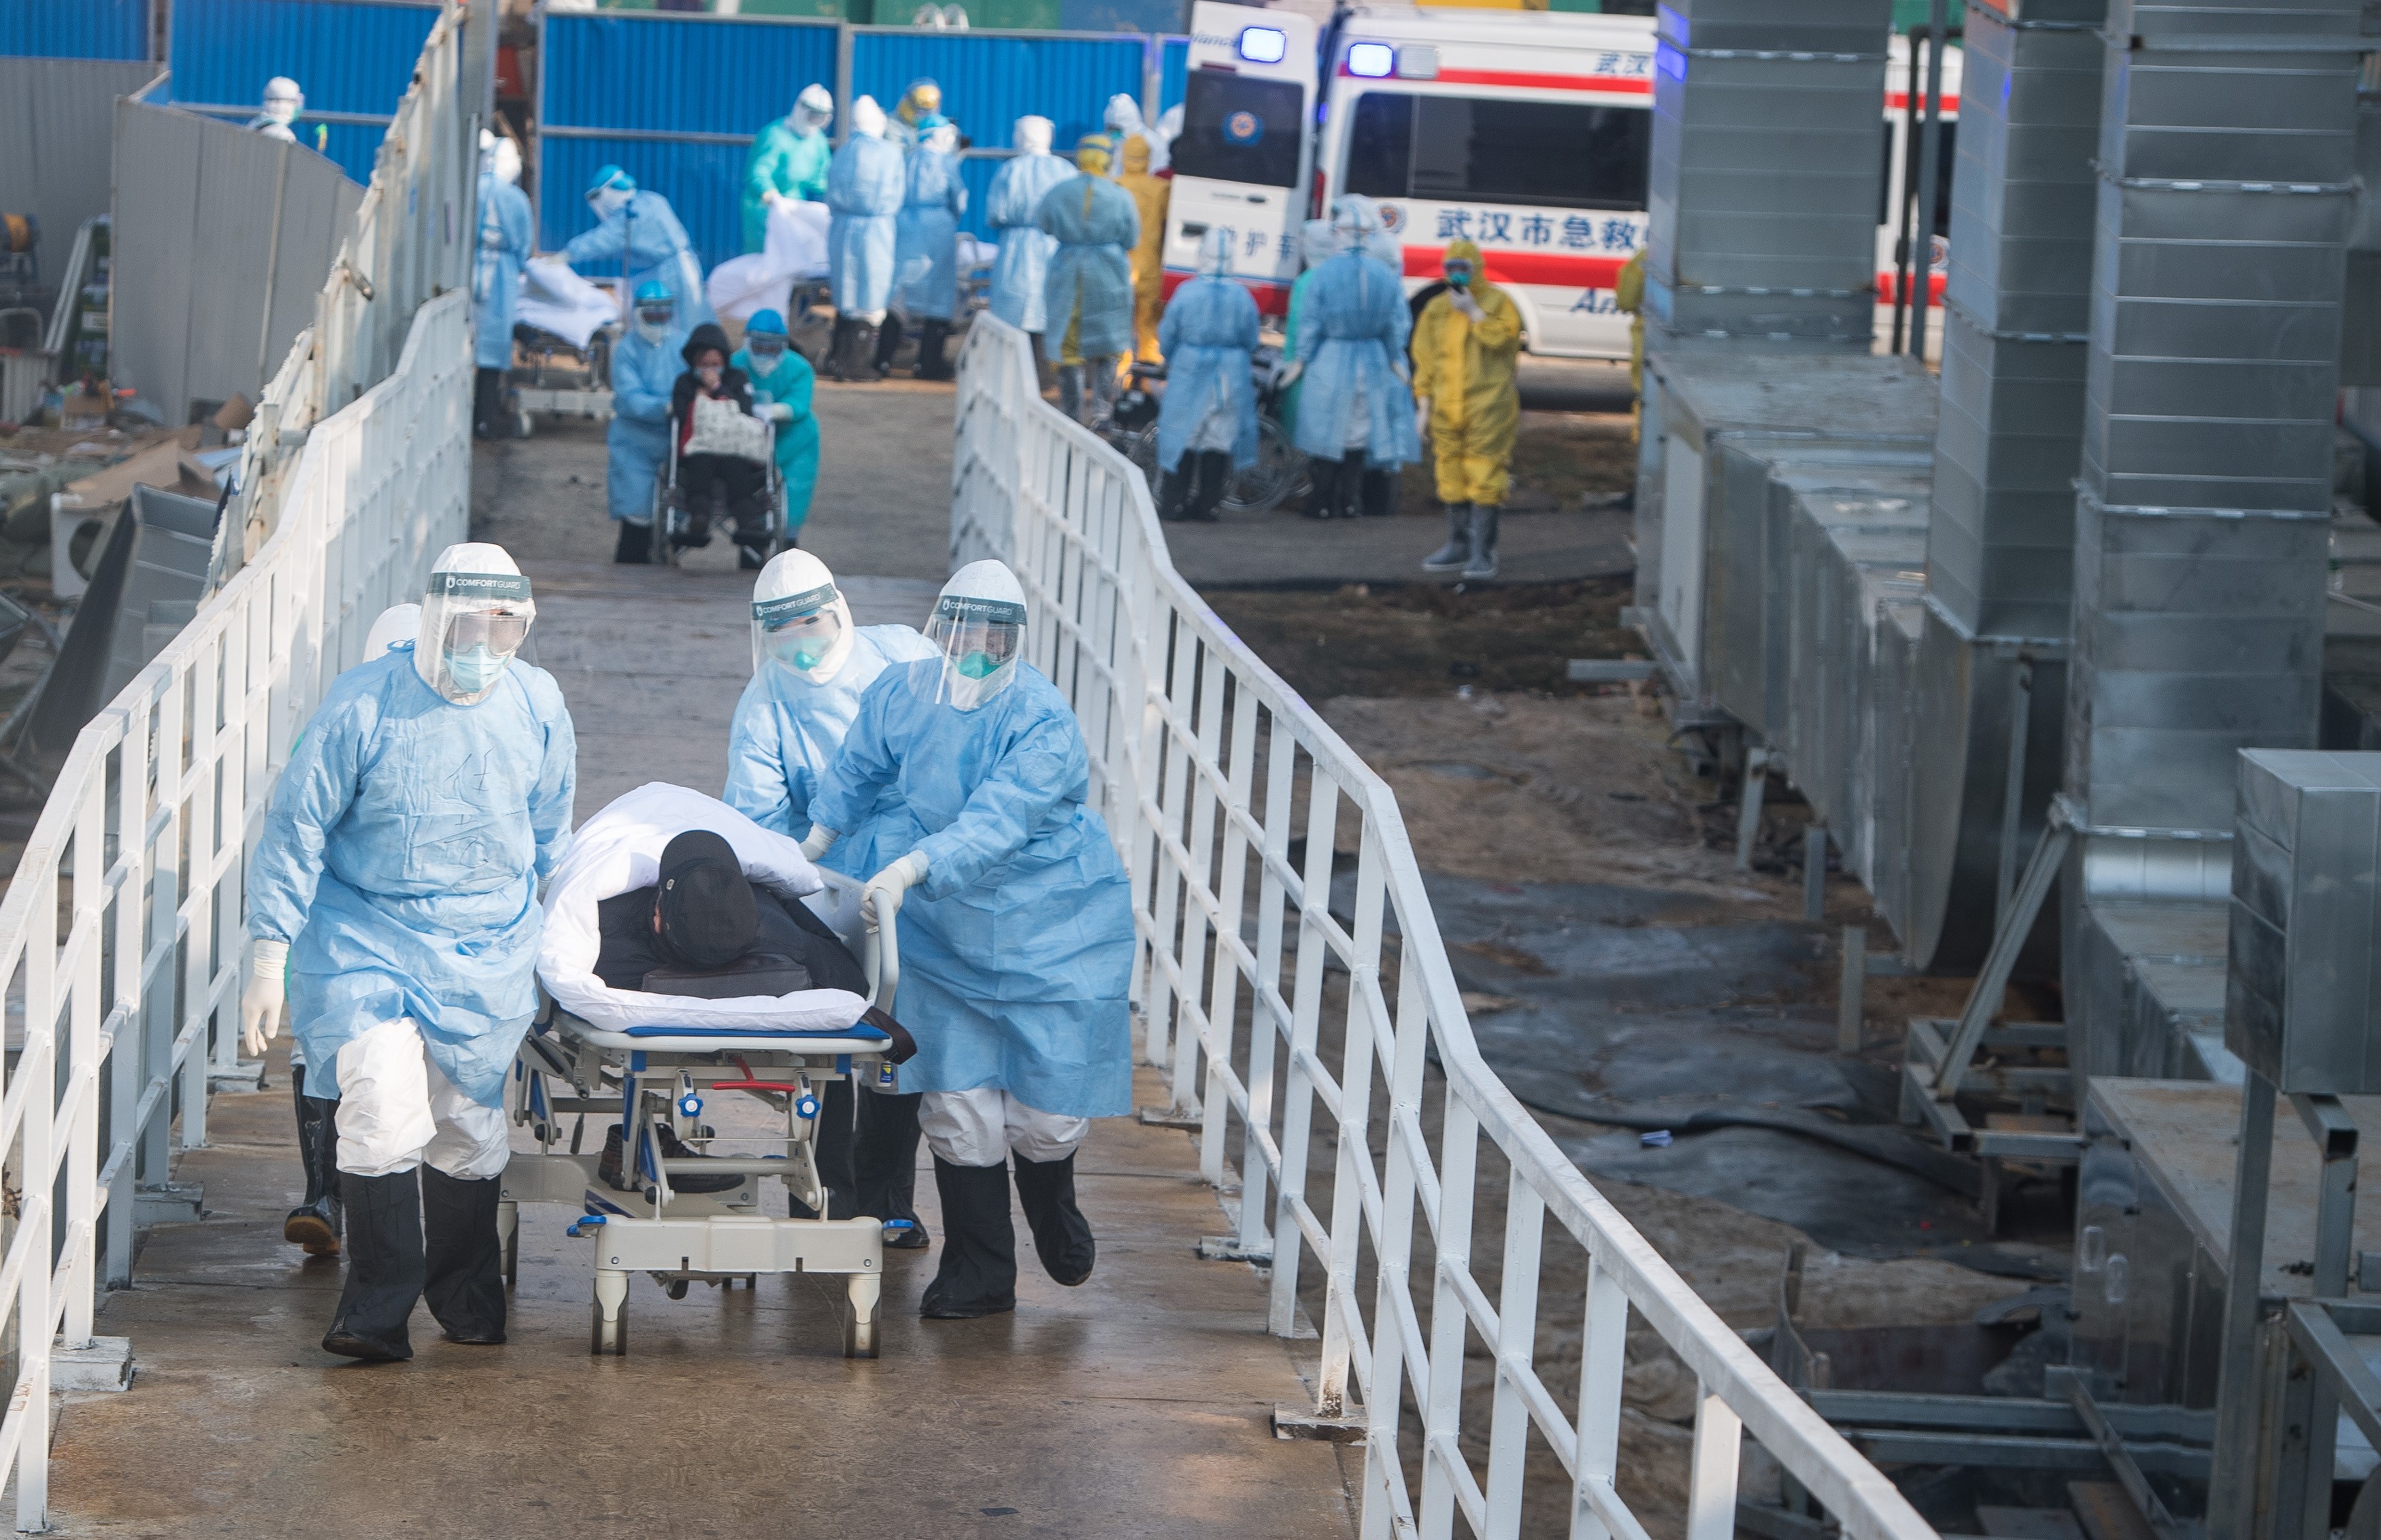 Medical workers take coronavirus patients to their isolation wards at the newly built Huoshenshan Hospital in Wuhan, central China's Hubei Province. Photo: Xinhua